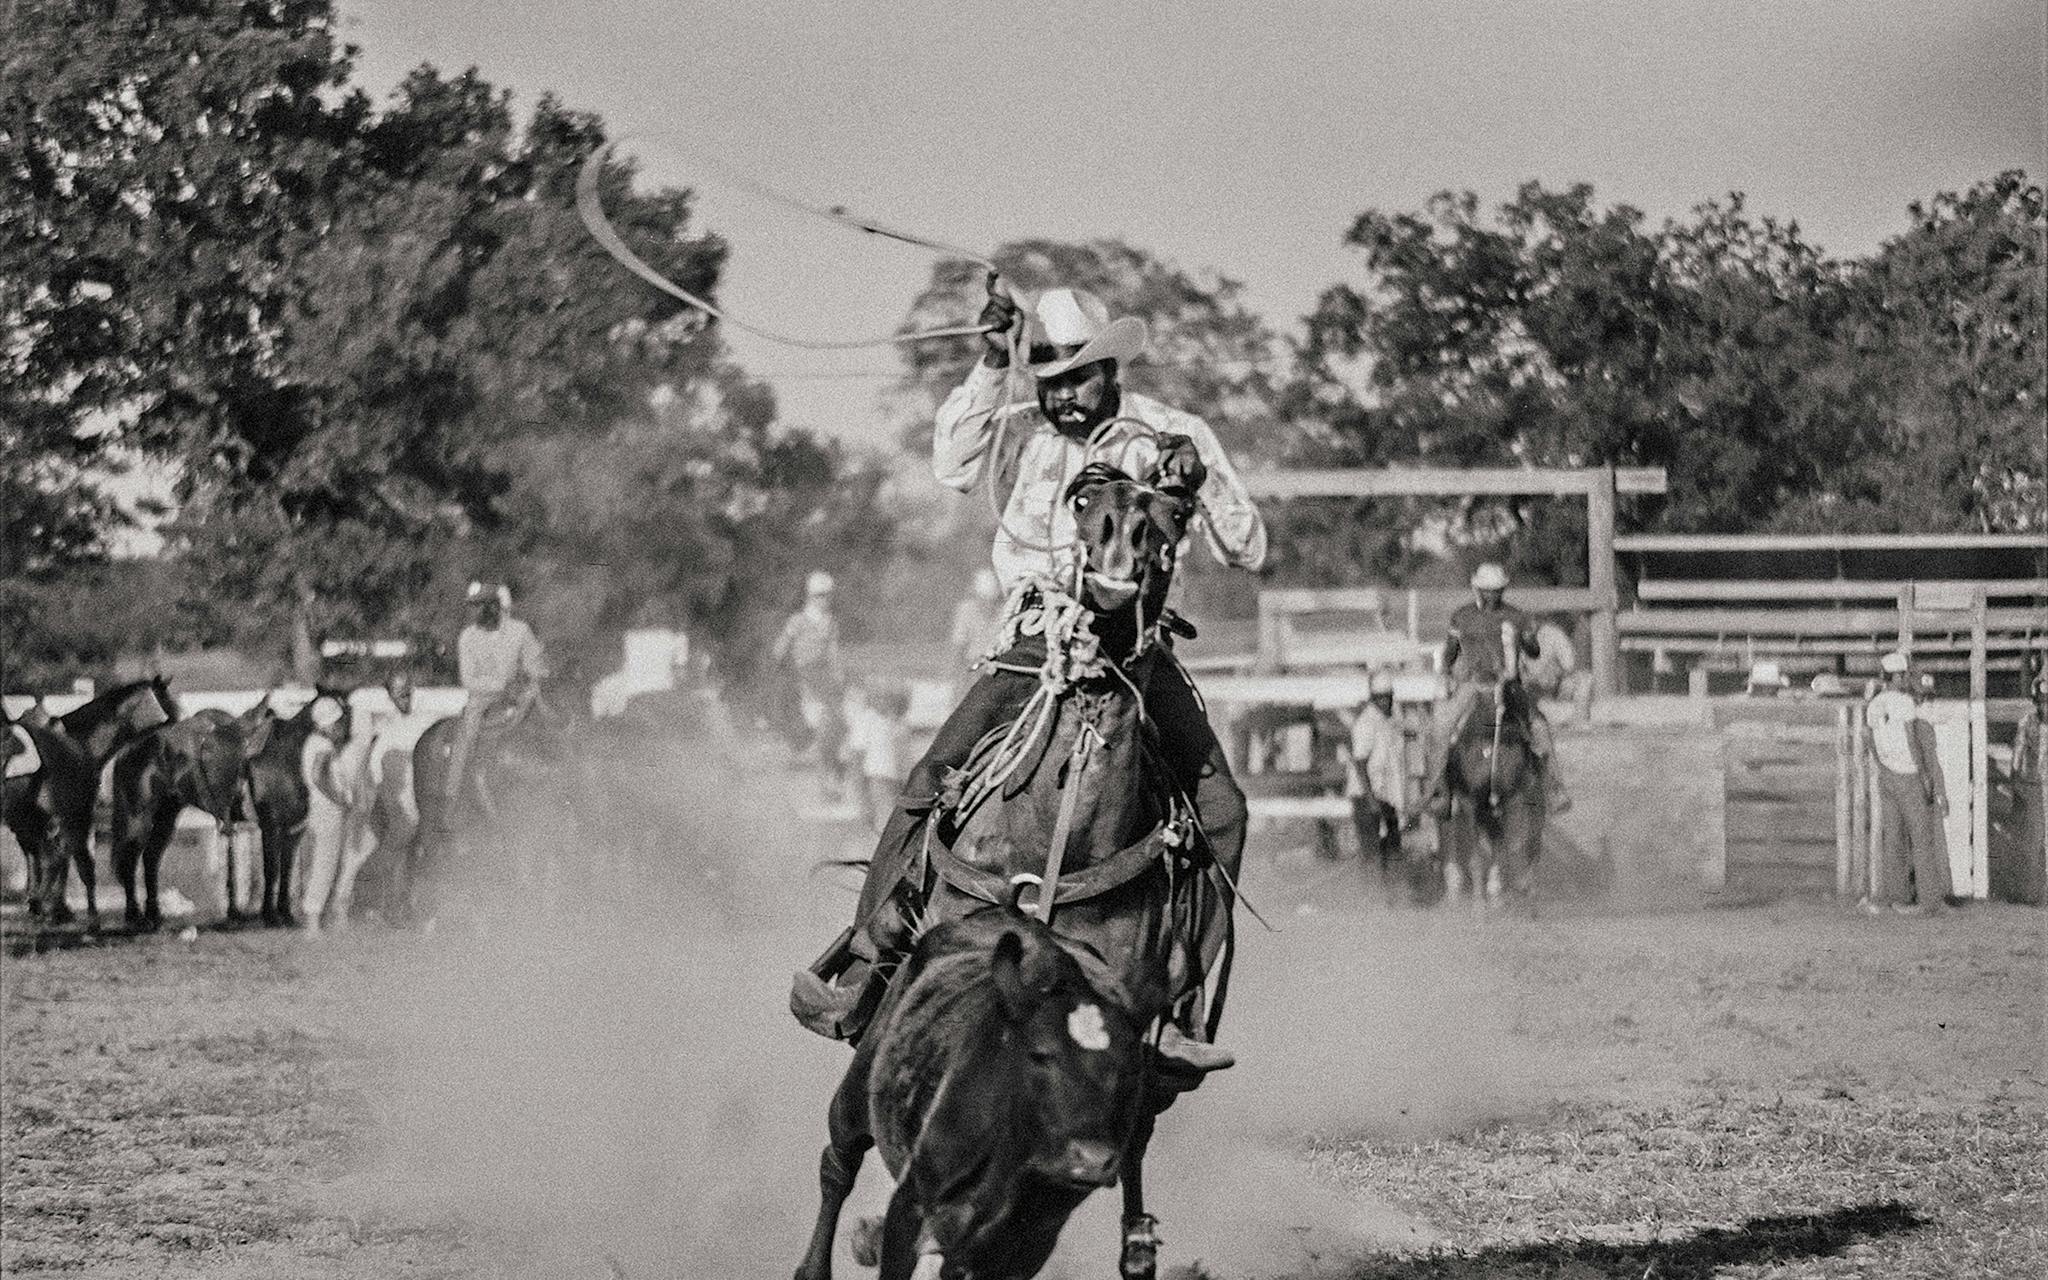 A roper chases his calf at an event near El Campo in the summer of 1978.